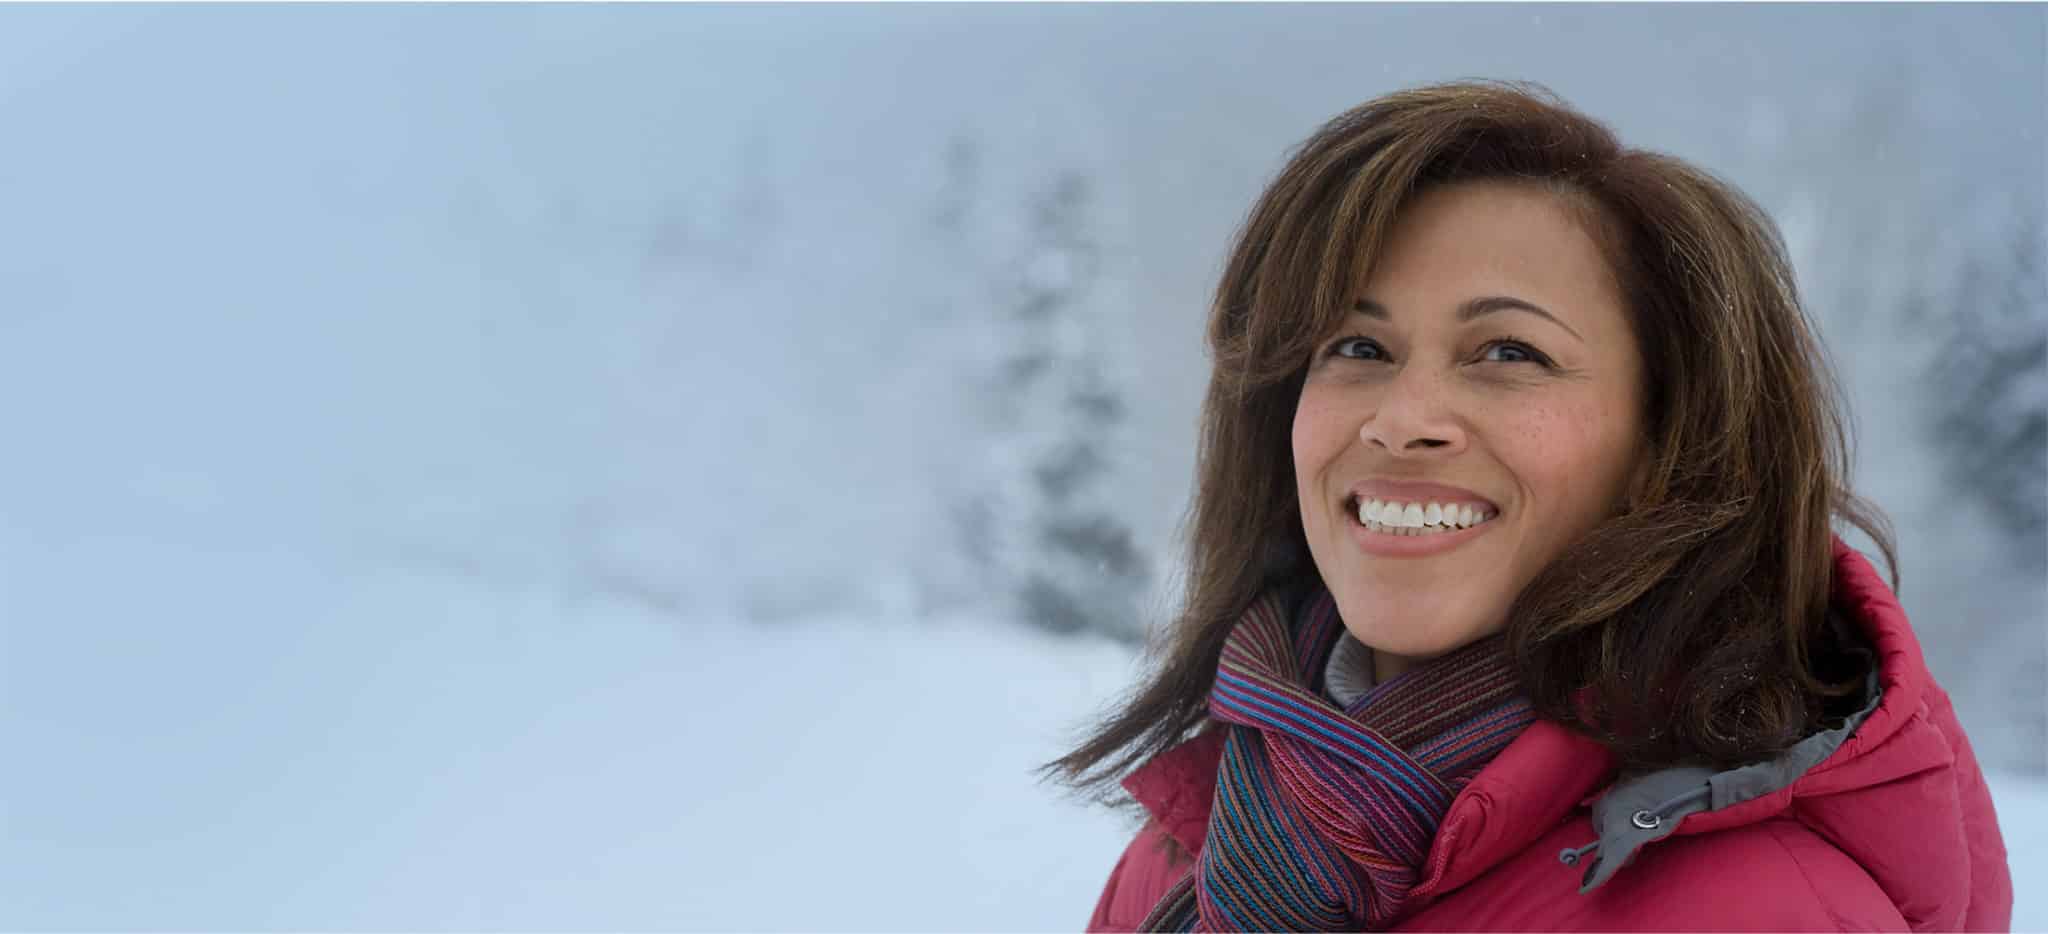 Smiling woman with a scarf in a snowstorm